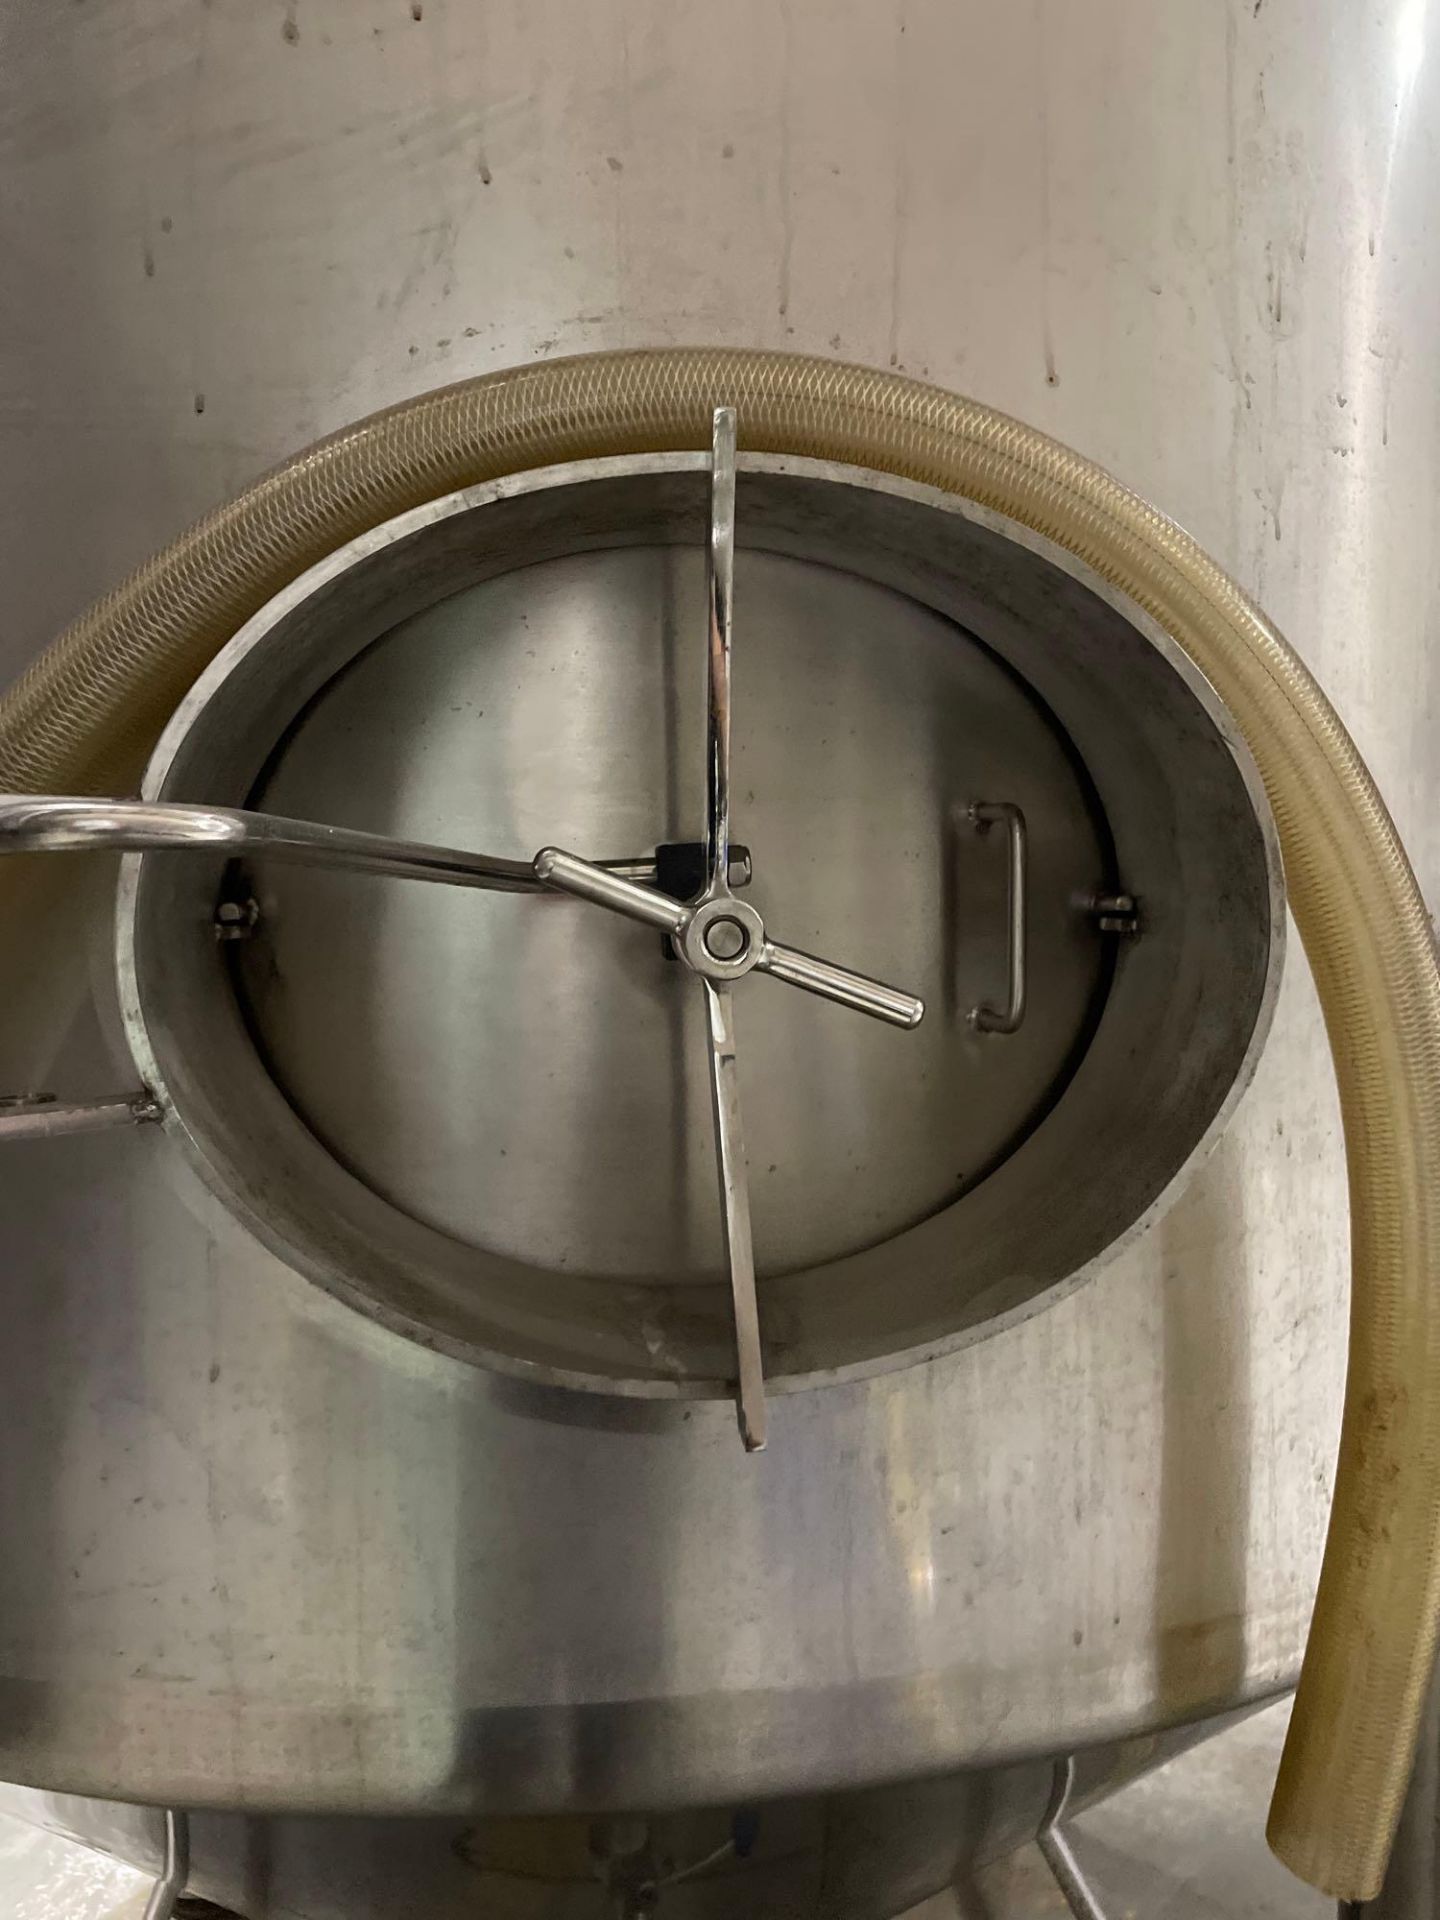 50 BBL SS Fermentation Vessel, Glycol Jacketed - Image 3 of 6